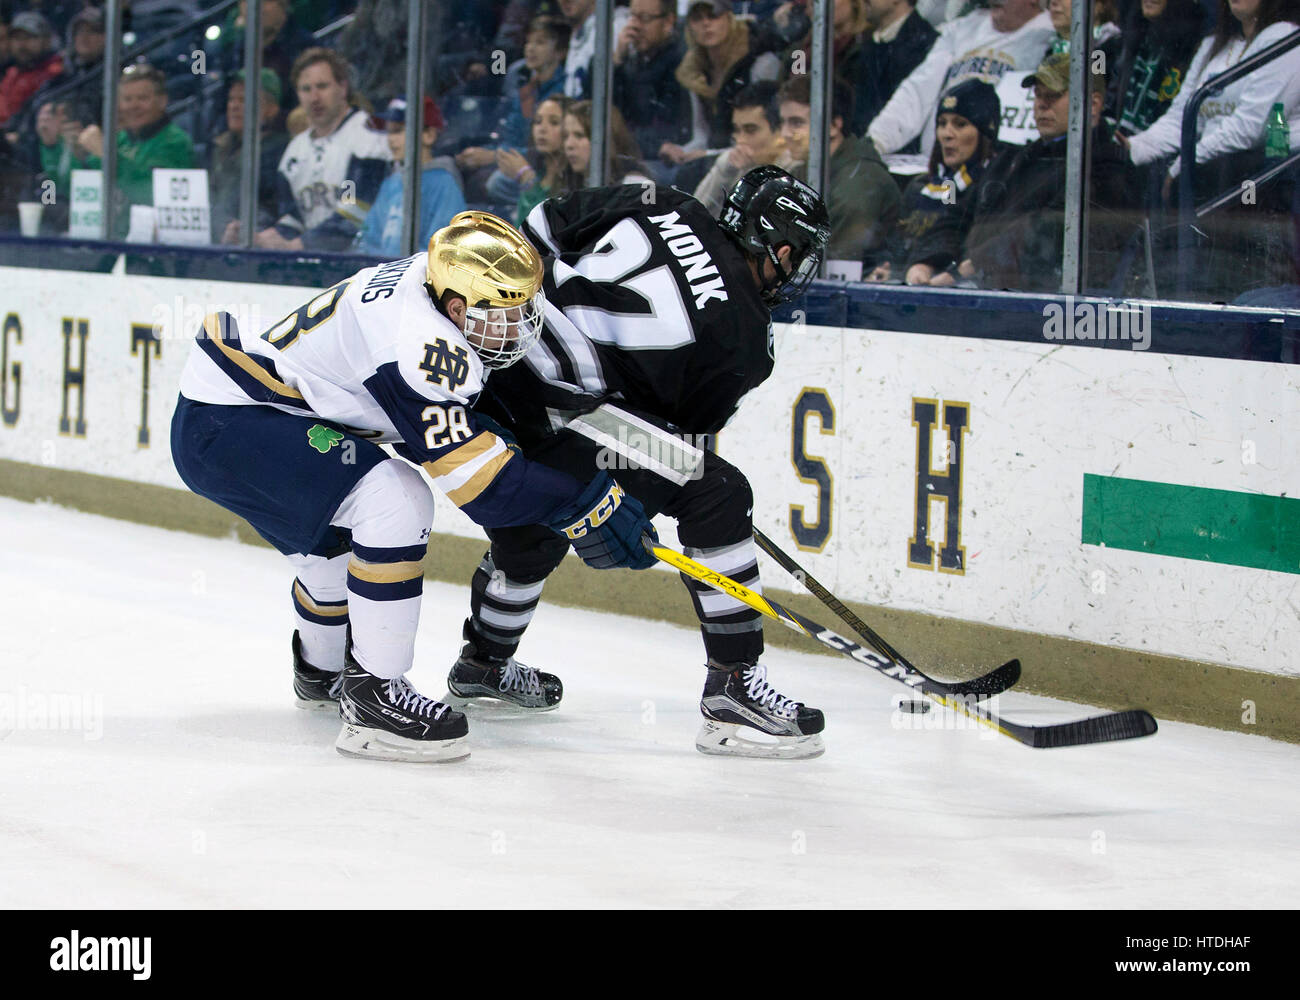 South Bend, Indiana, USA. 10th Mar, 2017. Notre Dame forward Jack Jenkins (28) and Providence defenseman Josh Monk (27) battle for the puck during NCAA Hockey game action between the Notre Dame Fighting Irish and the Providence College Friars at Compton Family Ice Arena in South Bend, Indiana. John Mersits/CSM/Alamy Live News Stock Photo